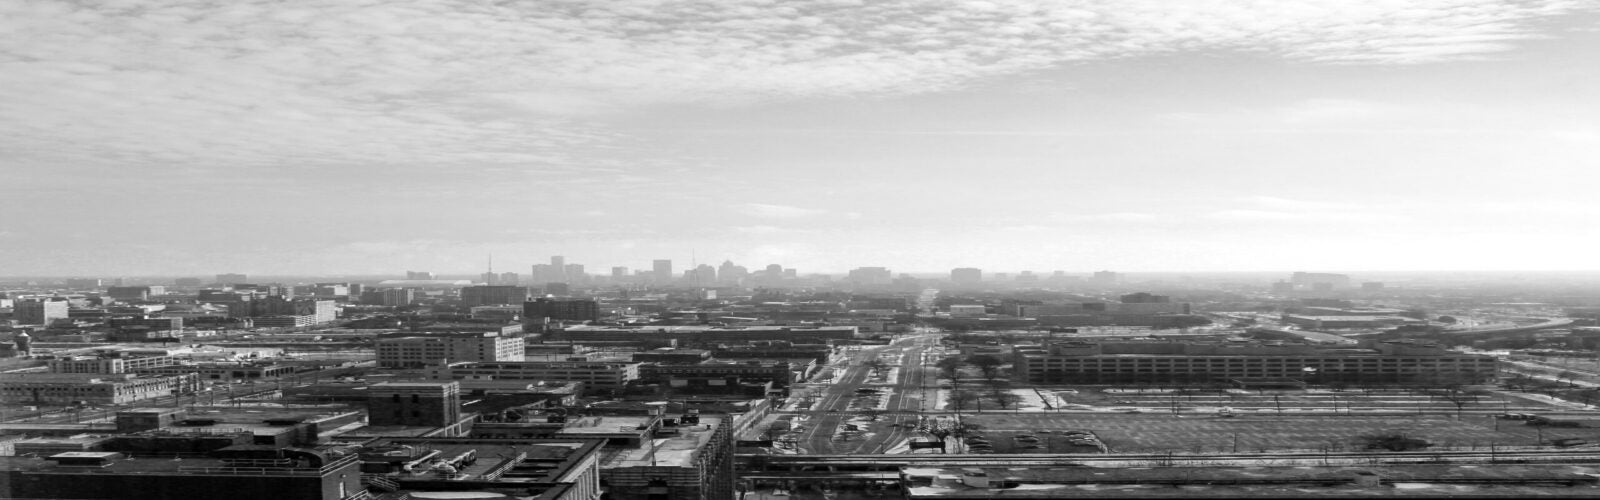 Air Pollution and Mortality at the Intersection of Race and Social Class